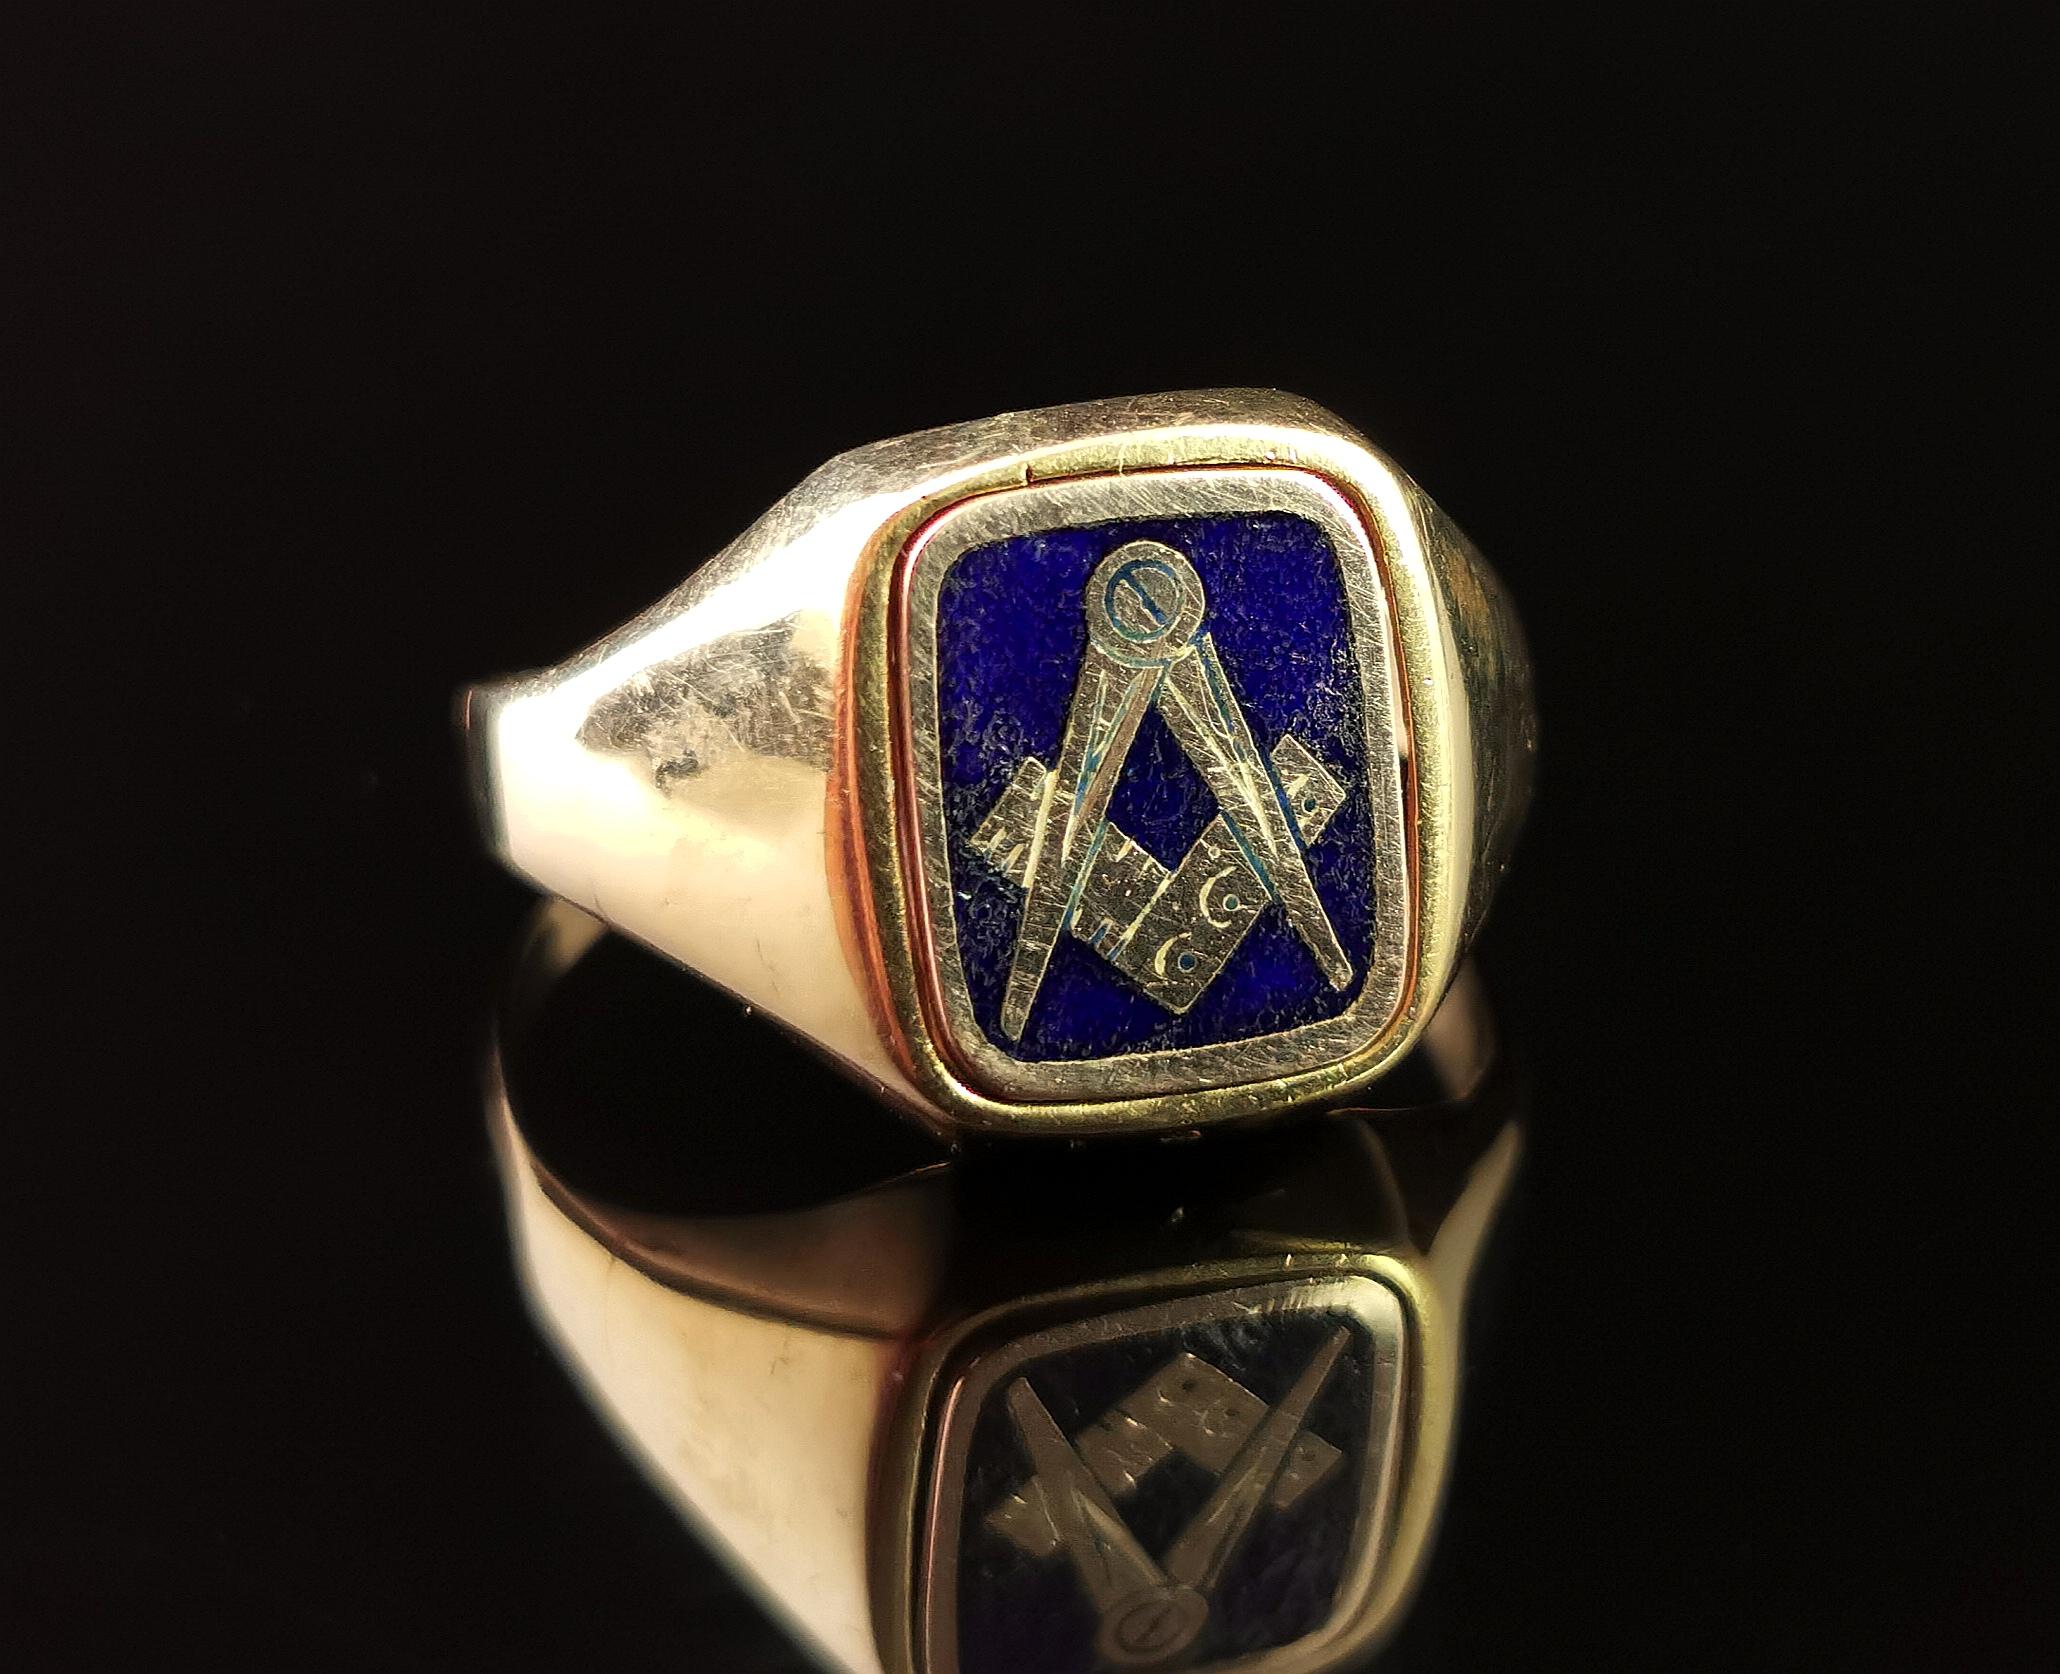 A handsome vintage 9 karat yellow gold Masonic swivel ring.

A signet style ring with the freemason emblem of compass and ruler to the front engraved into cobalt blue enamel.

It has a smooth gold band with heavy set tapering shoulders.

This is a